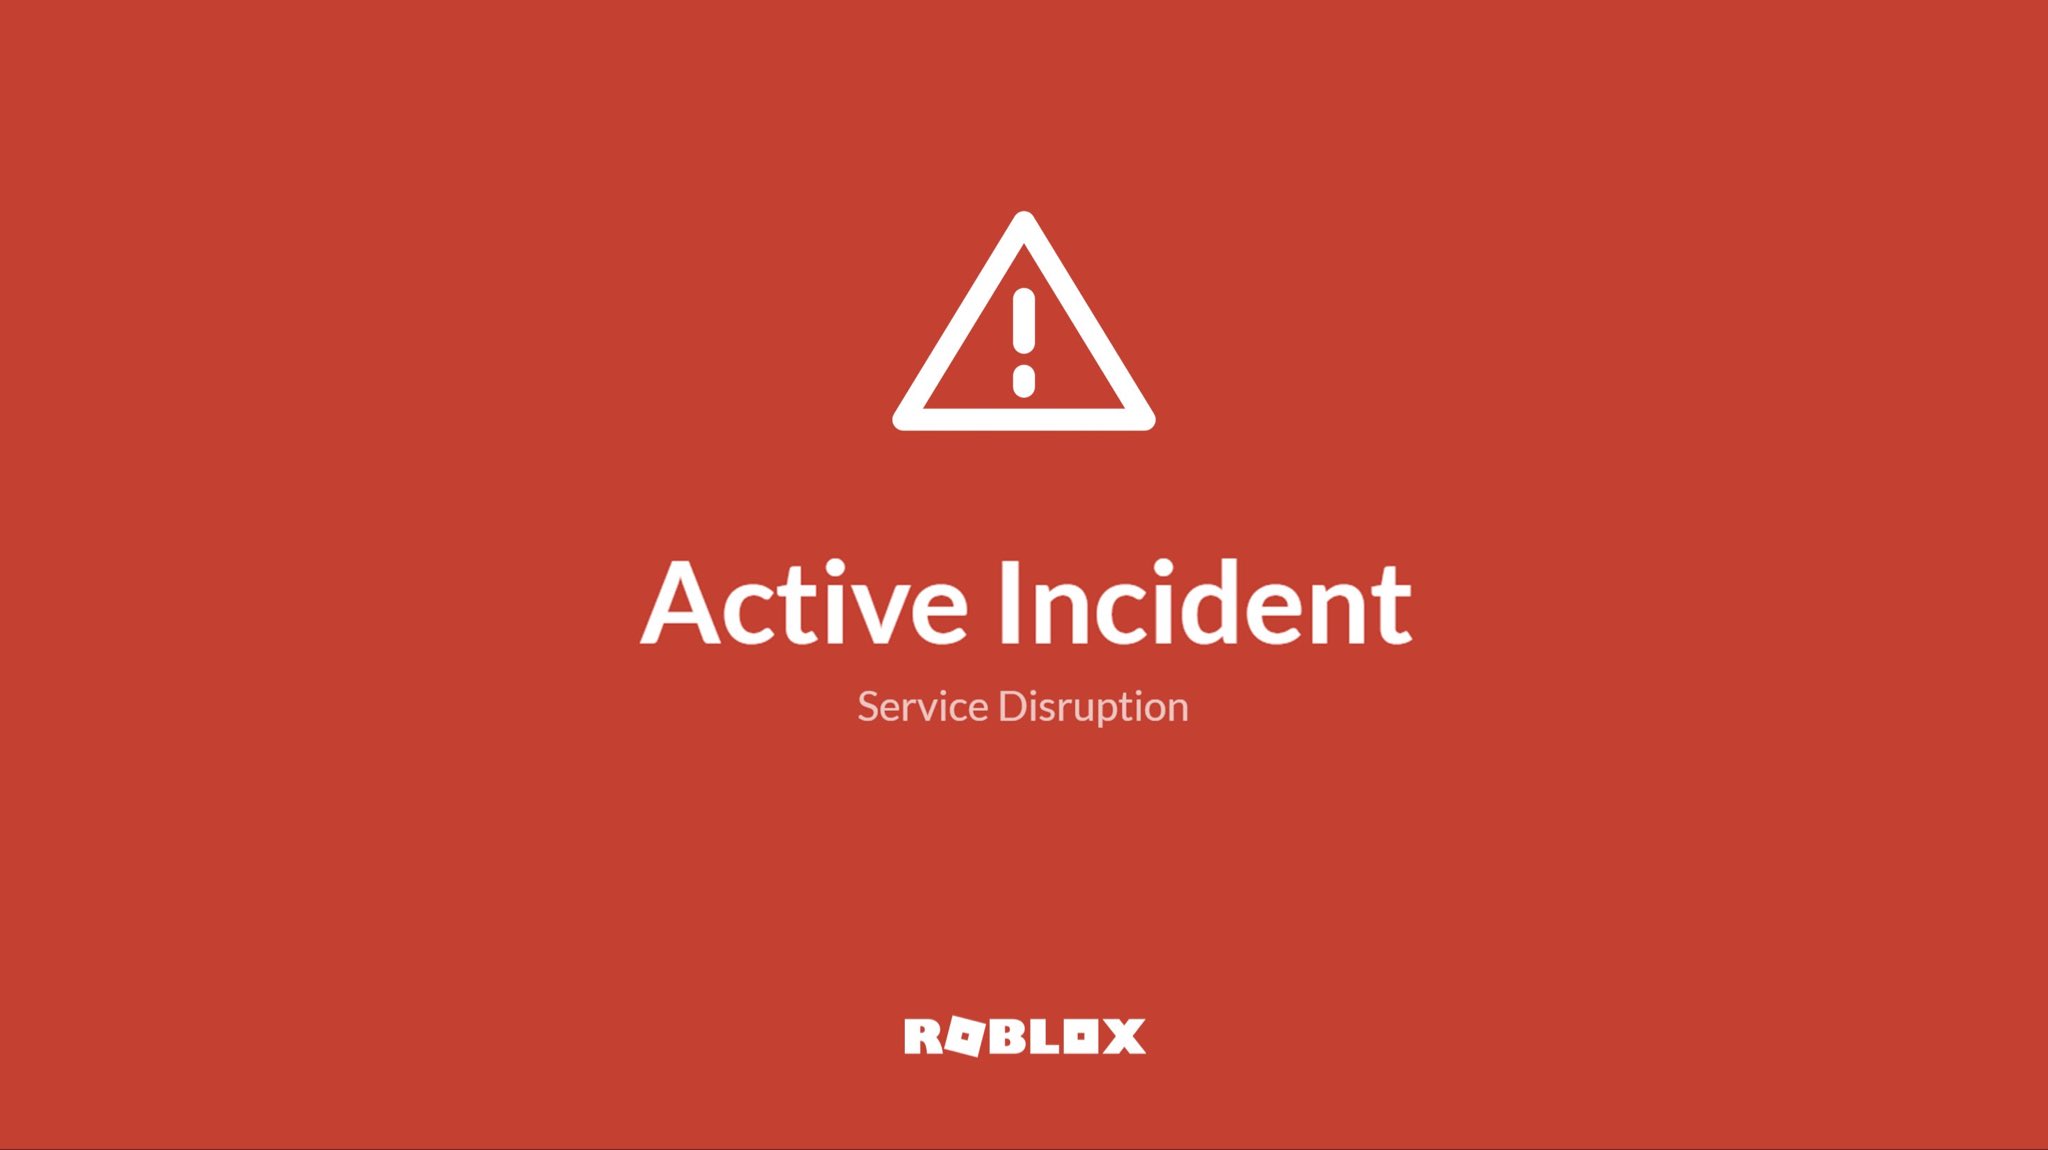 Roblox is Down (More Info)